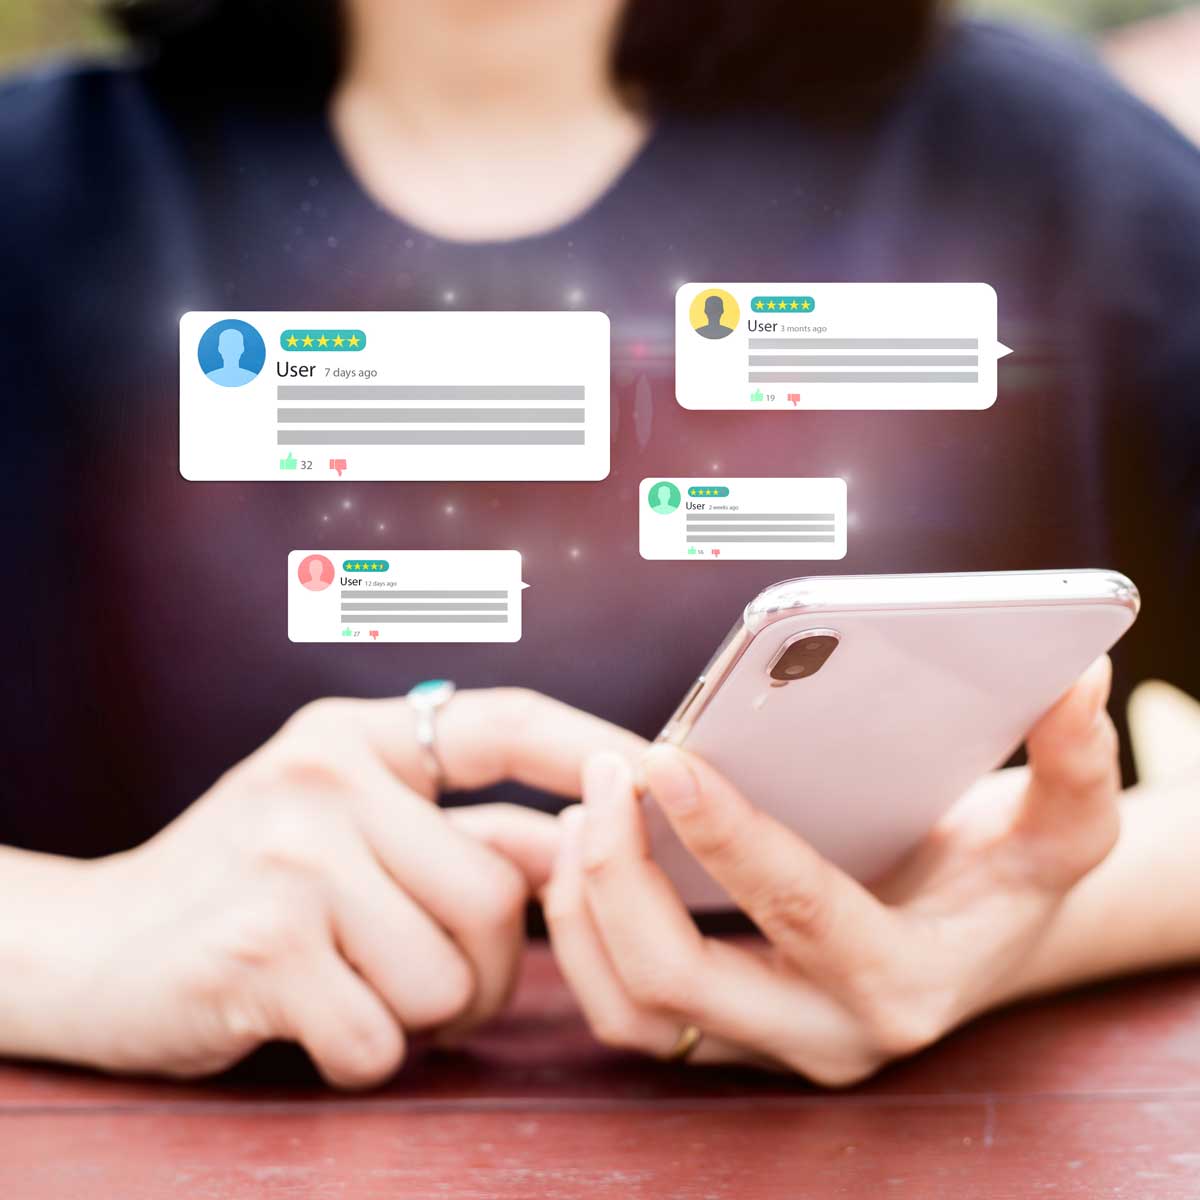 candidate engaging with job postings and career opportunities in manufacturing online using her phone. image of a woman's hands holding a cell phone with blank user messages floating above